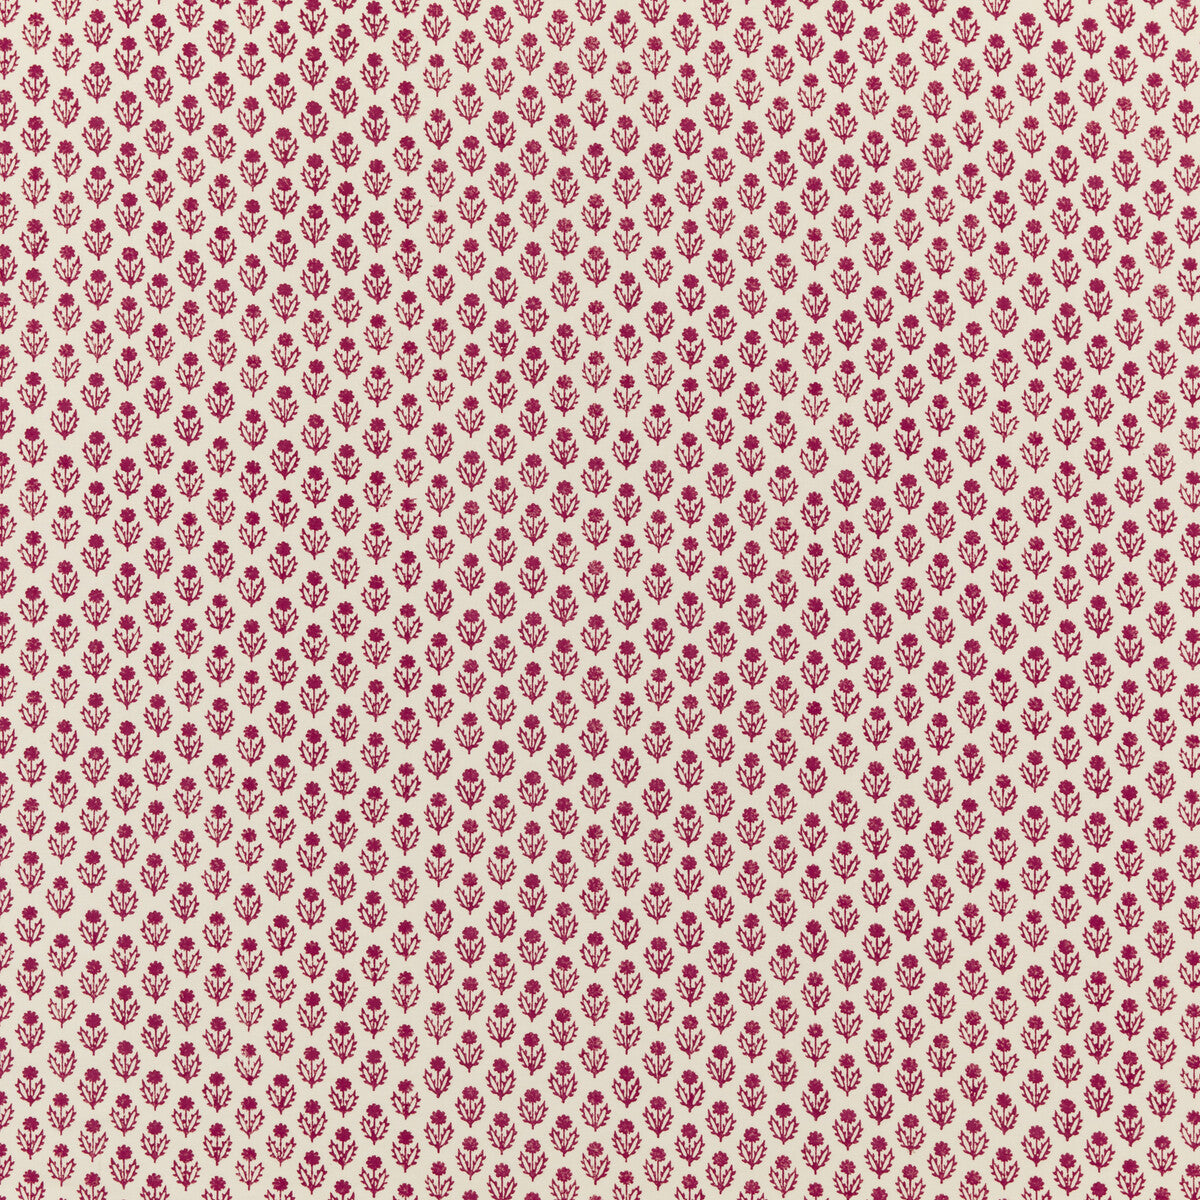 Avila fabric in fuchsia color - pattern PP50451.2.0 - by Baker Lifestyle in the Homes &amp; Gardens III collection